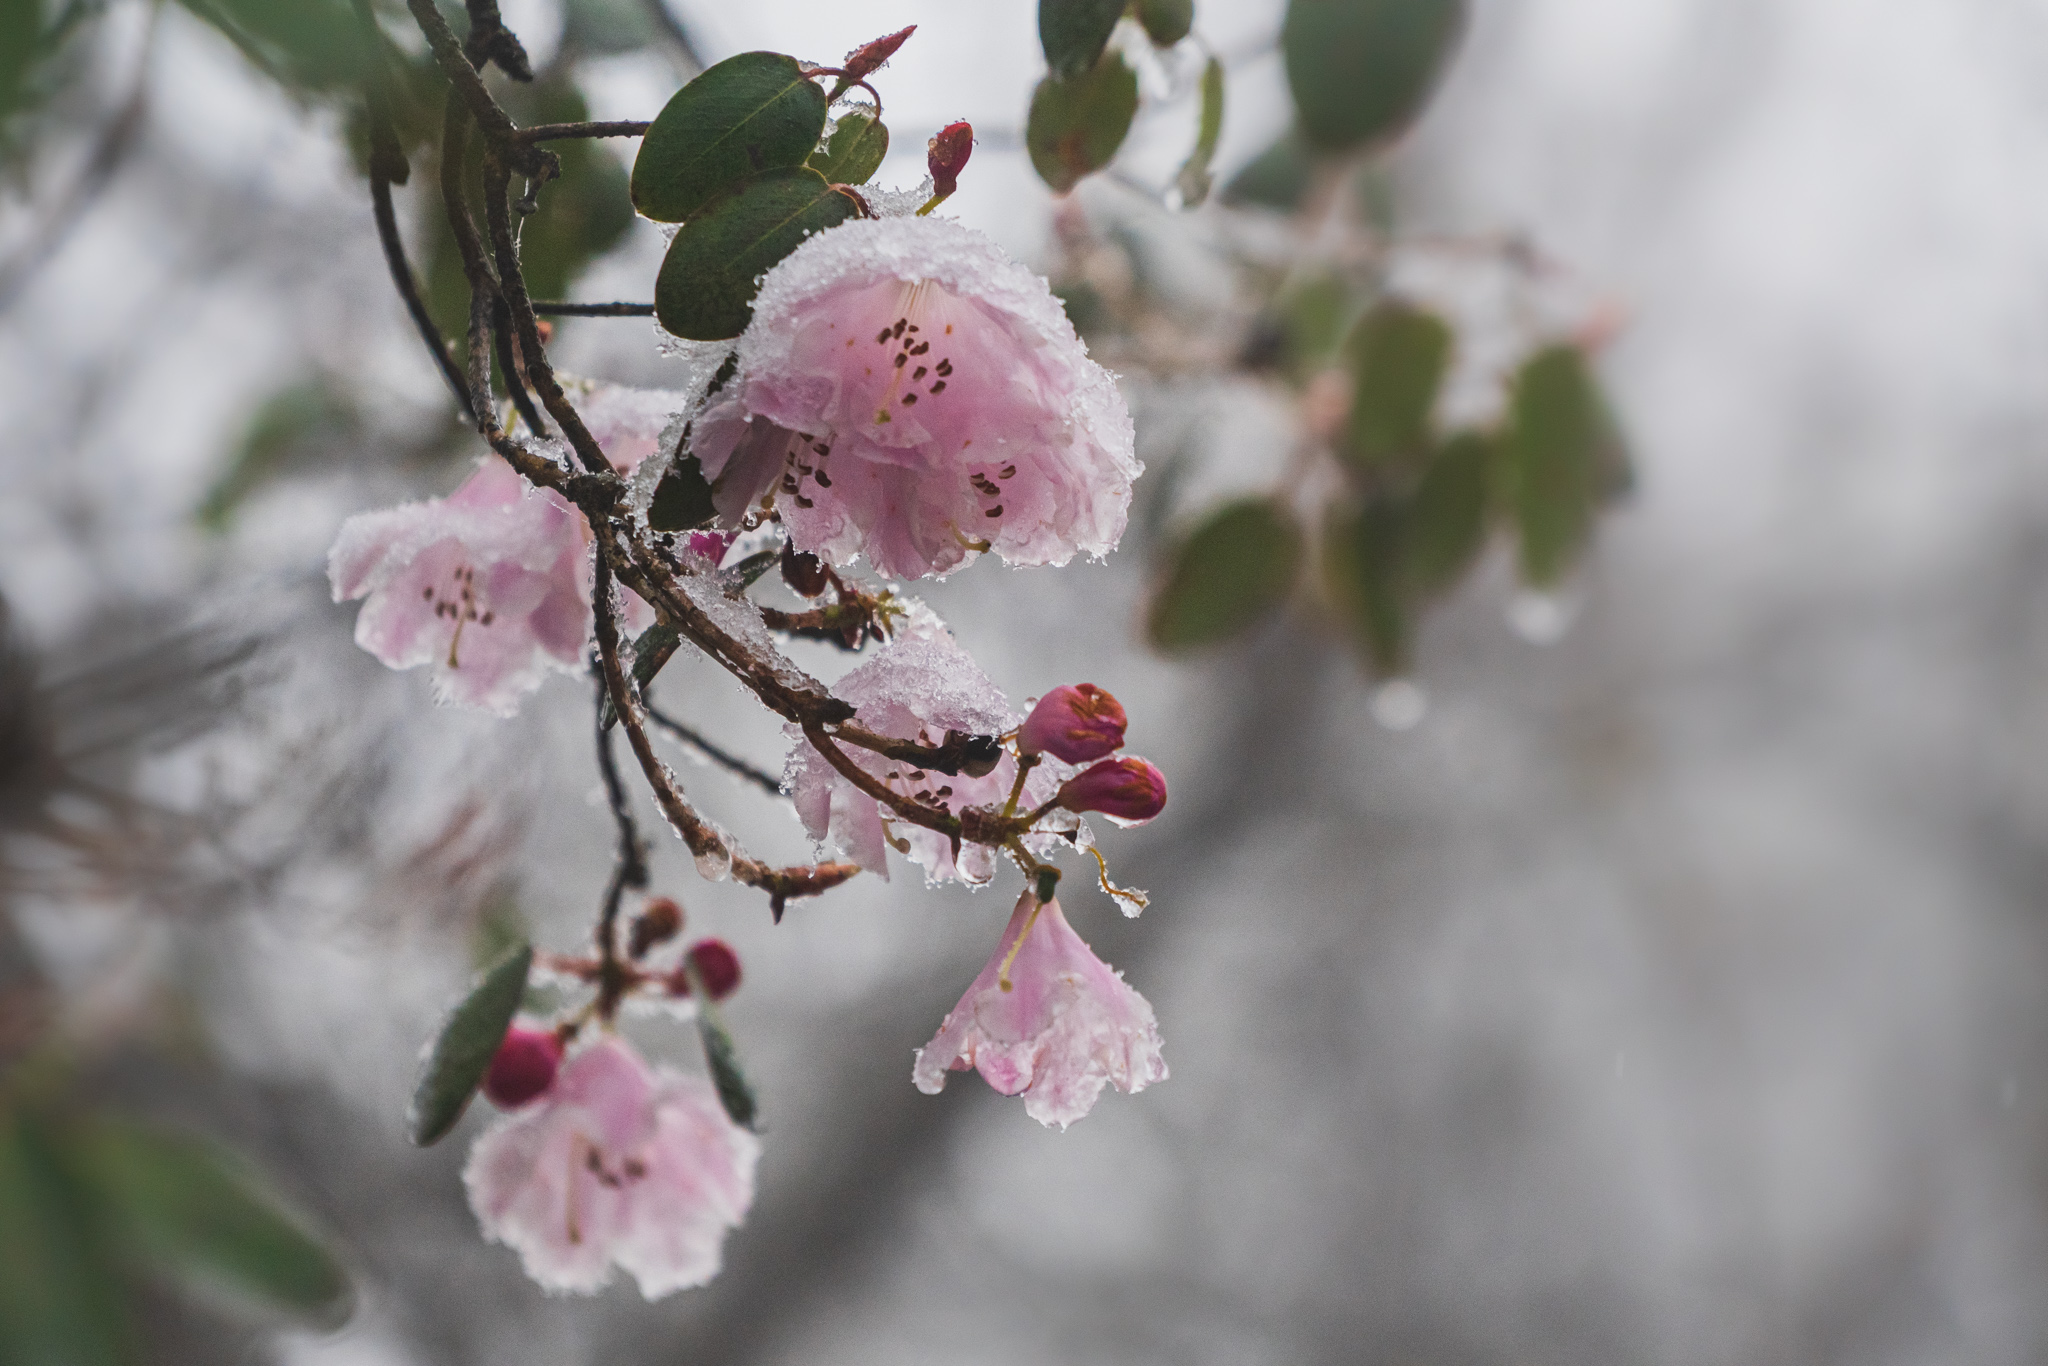 pink flowers, ice-covered flowers, frozen blossoms, fresh flowers in ice, ice-glazed fruit tree, glacier-covered branches, frosty pink blossoms, frozen flower buds, icy spring blooms, fruit tree ice capture, ice-encased foliage, winterized floral beauty,, Druz Denys